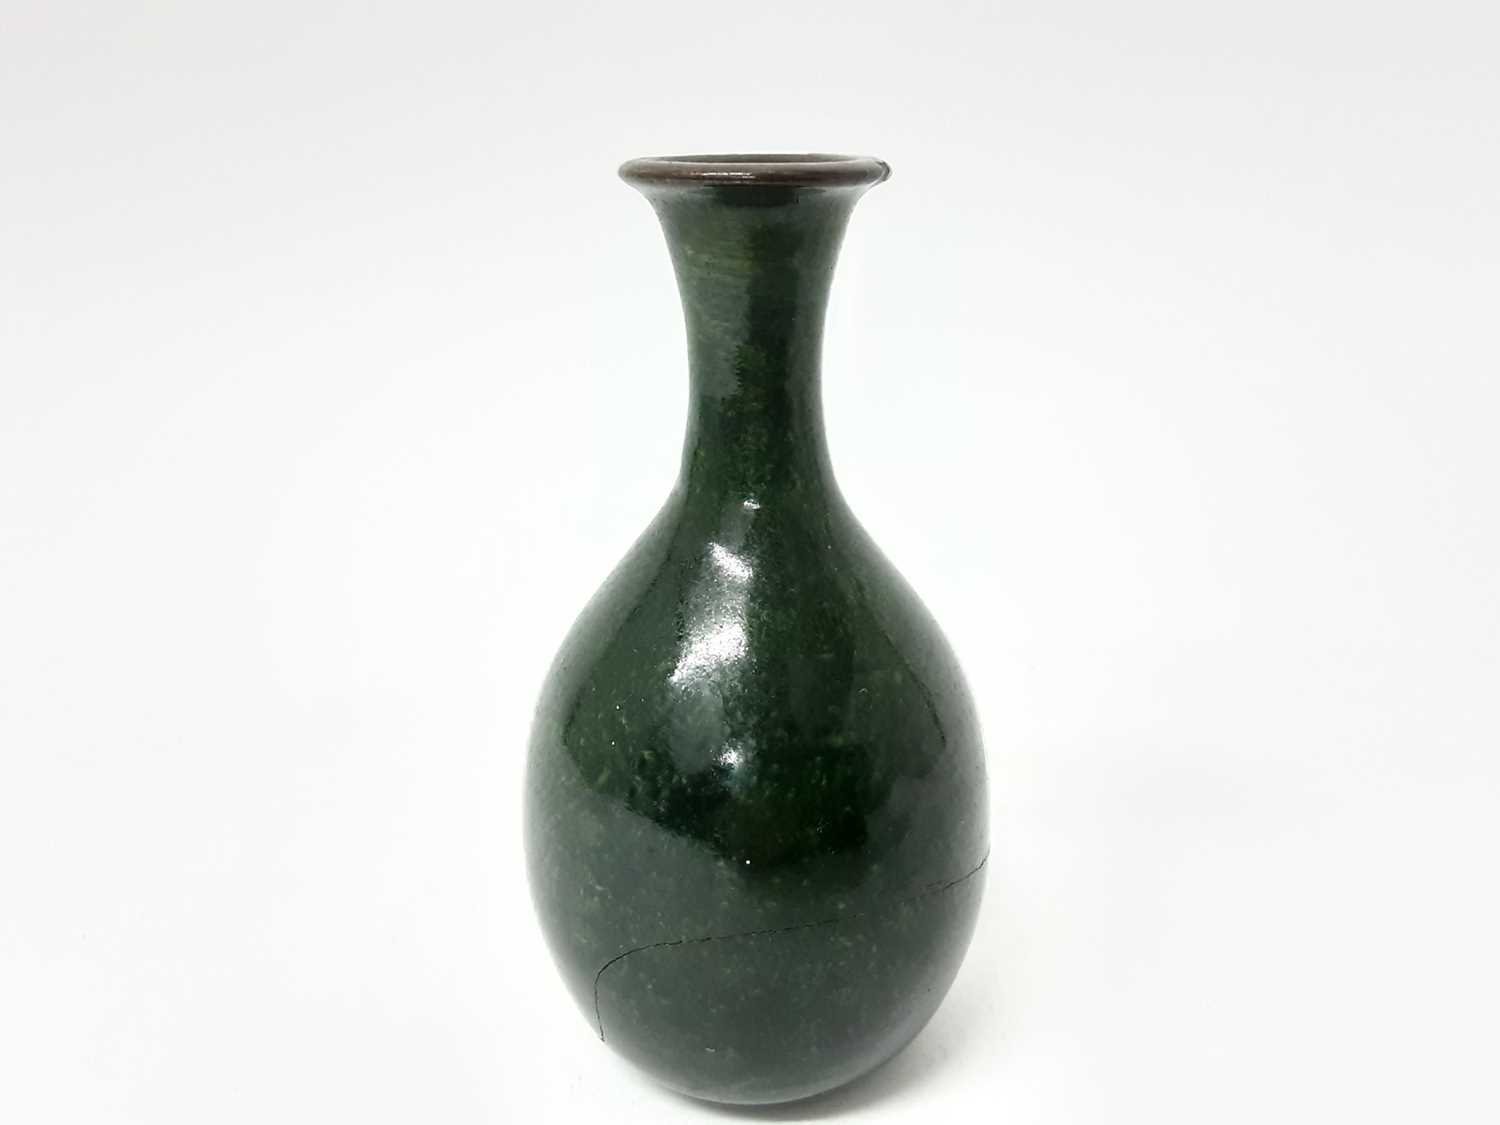 Lot 77 - Martin Brothers stoneware bottle vase, decorated with a mottled green glaze, inscribed mark to base, 12.5cm height